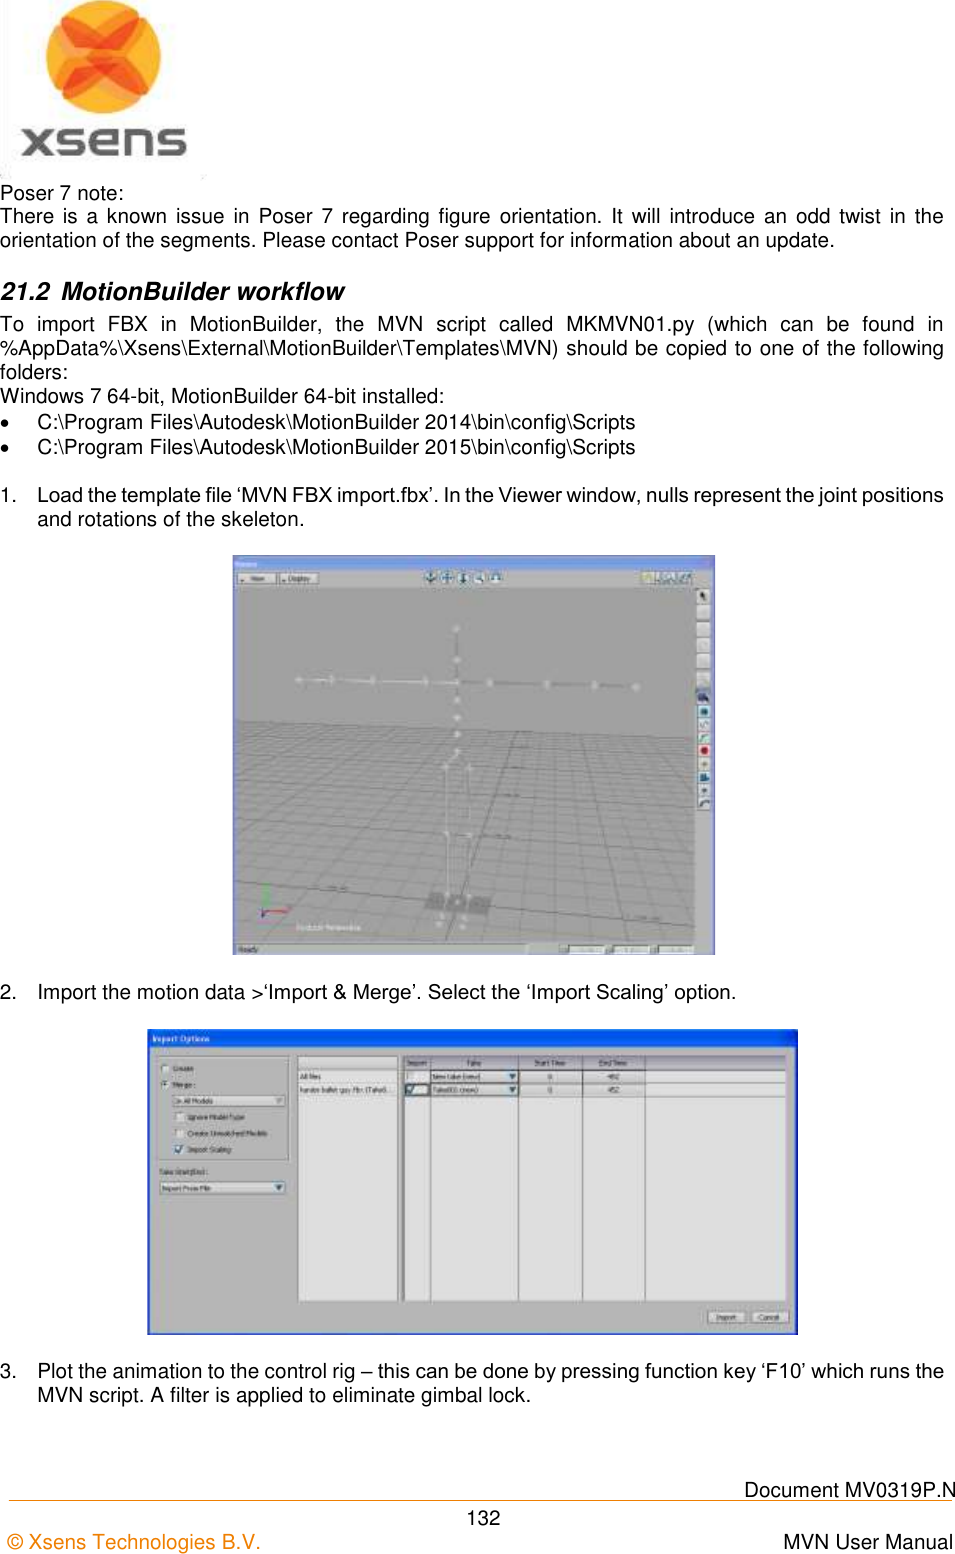    Document MV0319P.N © Xsens Technologies B.V.      MVN User Manual  132 Poser 7 note: There  is a  known issue in Poser  7 regarding figure  orientation.  It  will  introduce an  odd  twist  in  the orientation of the segments. Please contact Poser support for information about an update. 21.2  MotionBuilder workflow To  import  FBX  in  MotionBuilder,  the  MVN  script  called  MKMVN01.py  (which  can  be  found  in %AppData%\Xsens\External\MotionBuilder\Templates\MVN) should be copied to one of the following folders: Windows 7 64-bit, MotionBuilder 64-bit installed:  C:\Program Files\Autodesk\MotionBuilder 2014\bin\config\Scripts  C:\Program Files\Autodesk\MotionBuilder 2015\bin\config\Scripts  1. Load the template file ‘MVN FBX import.fbx’. In the Viewer window, nulls represent the joint positions and rotations of the skeleton.  2.  Import the motion data &gt;‘Import &amp; Merge’. Select the ‘Import Scaling’ option.  3.  Plot the animation to the control rig – this can be done by pressing function key ‘F10’ which runs the MVN script. A filter is applied to eliminate gimbal lock. 